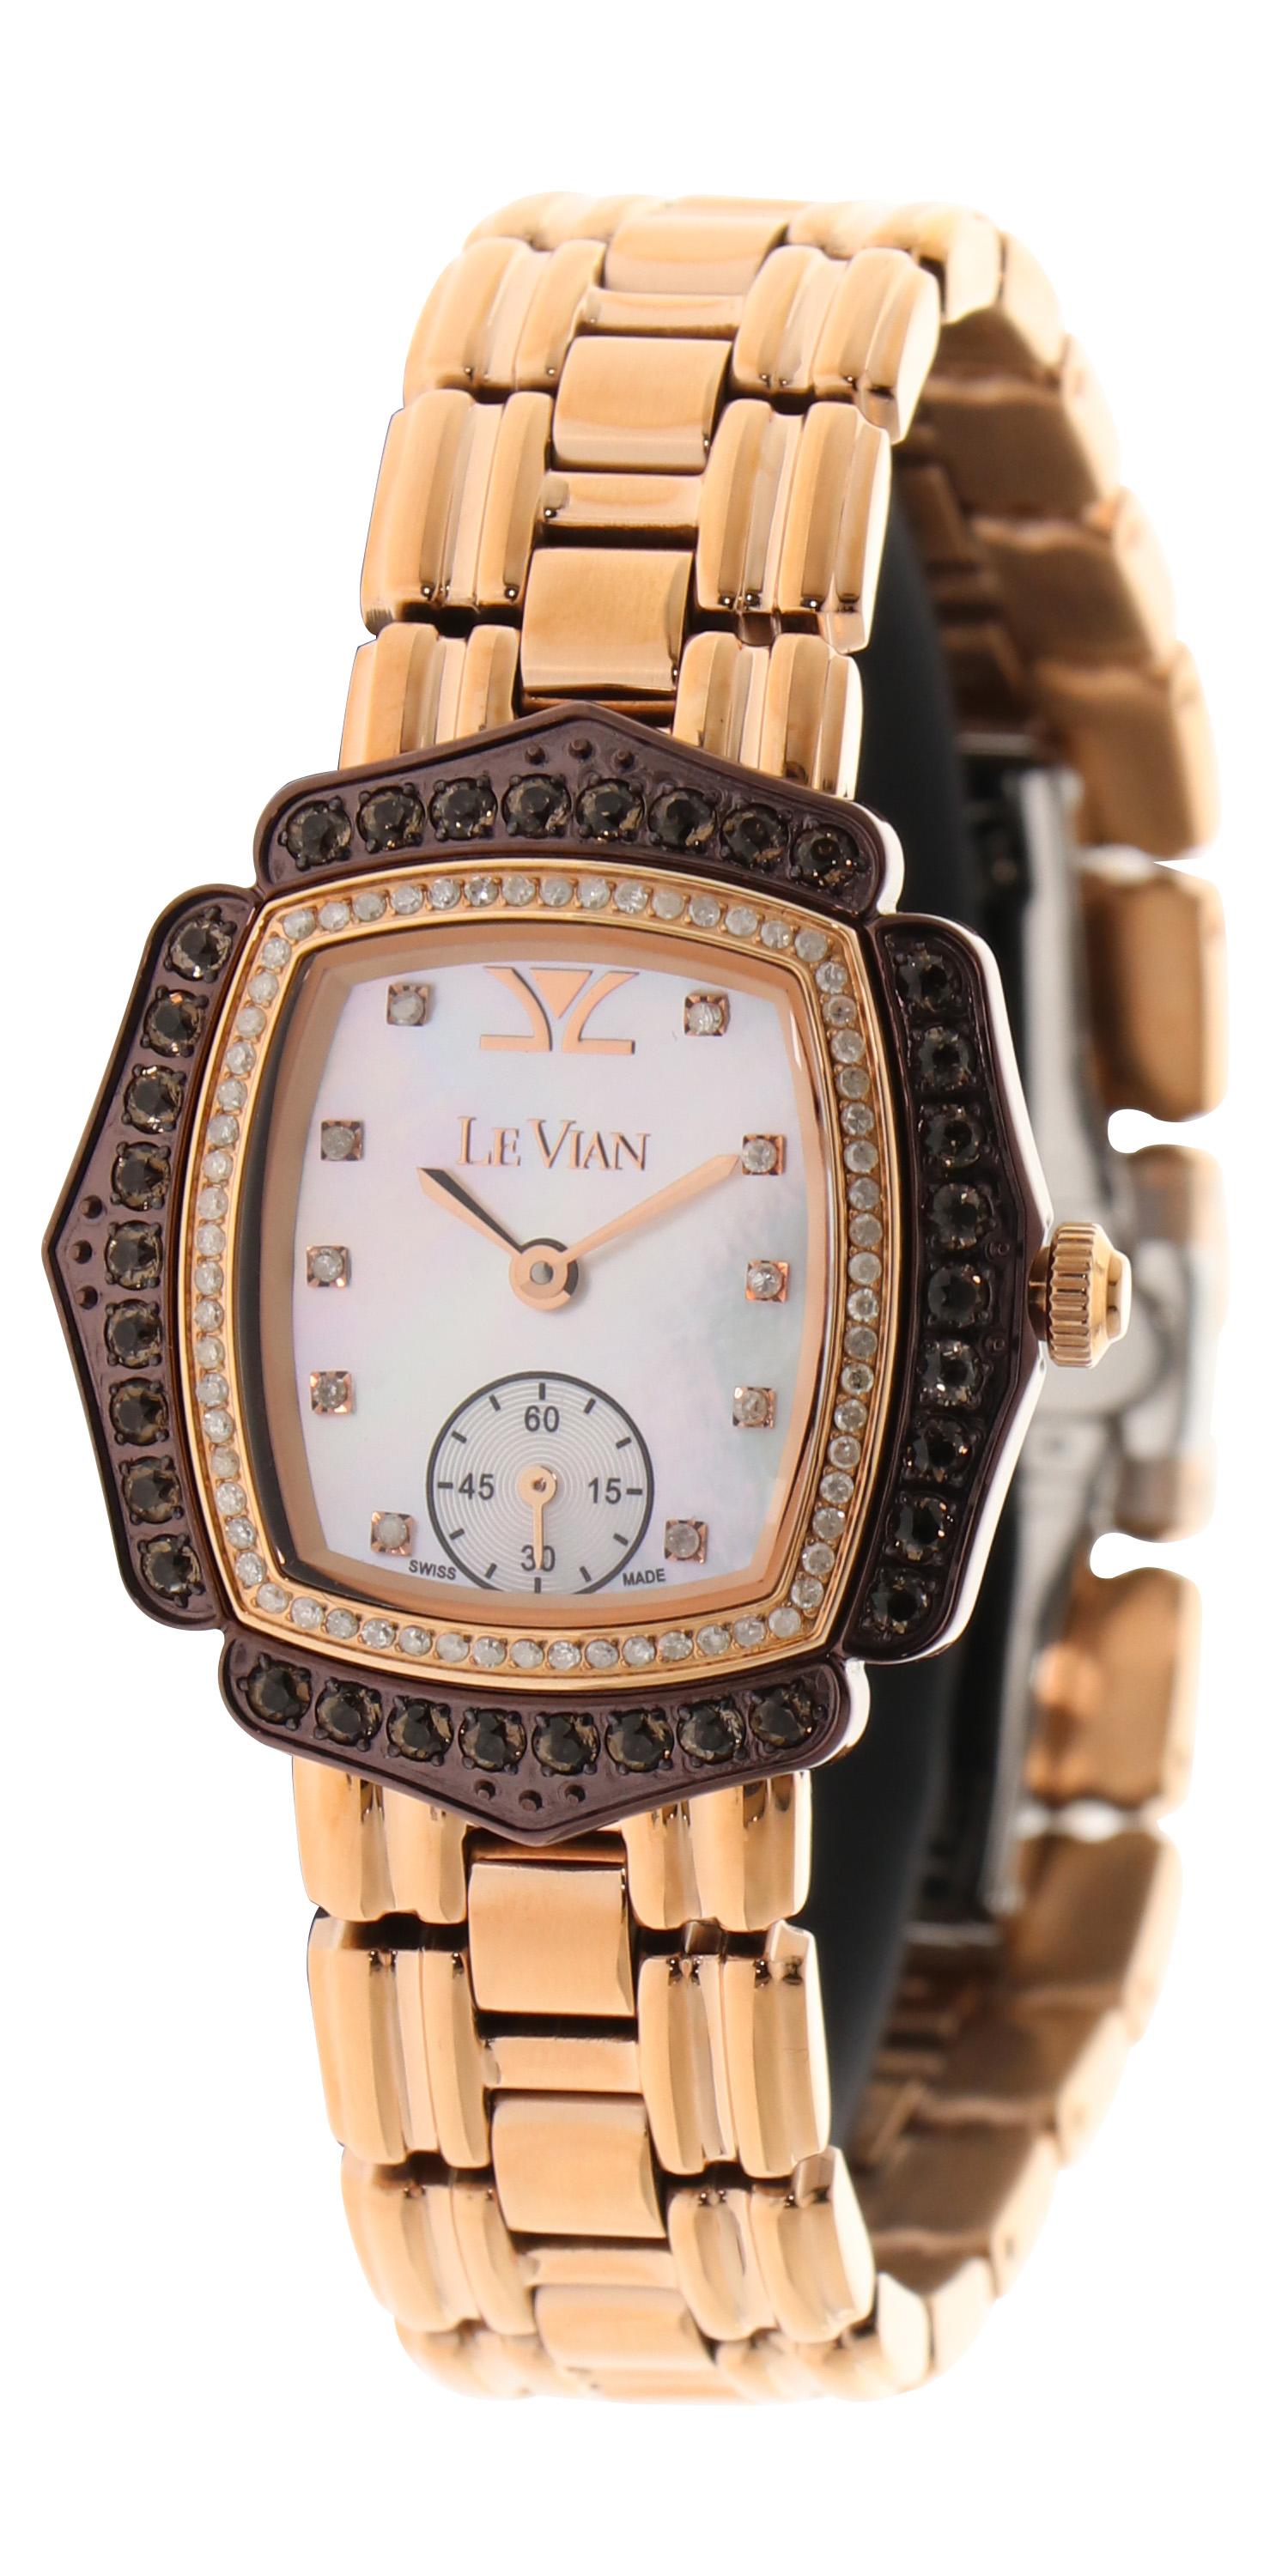 Le Vian 30mm Floral shaped Wristwatch featuring 0.37cts of Vanilla Diamonds in Strawberry Gold Stainless Steel.
